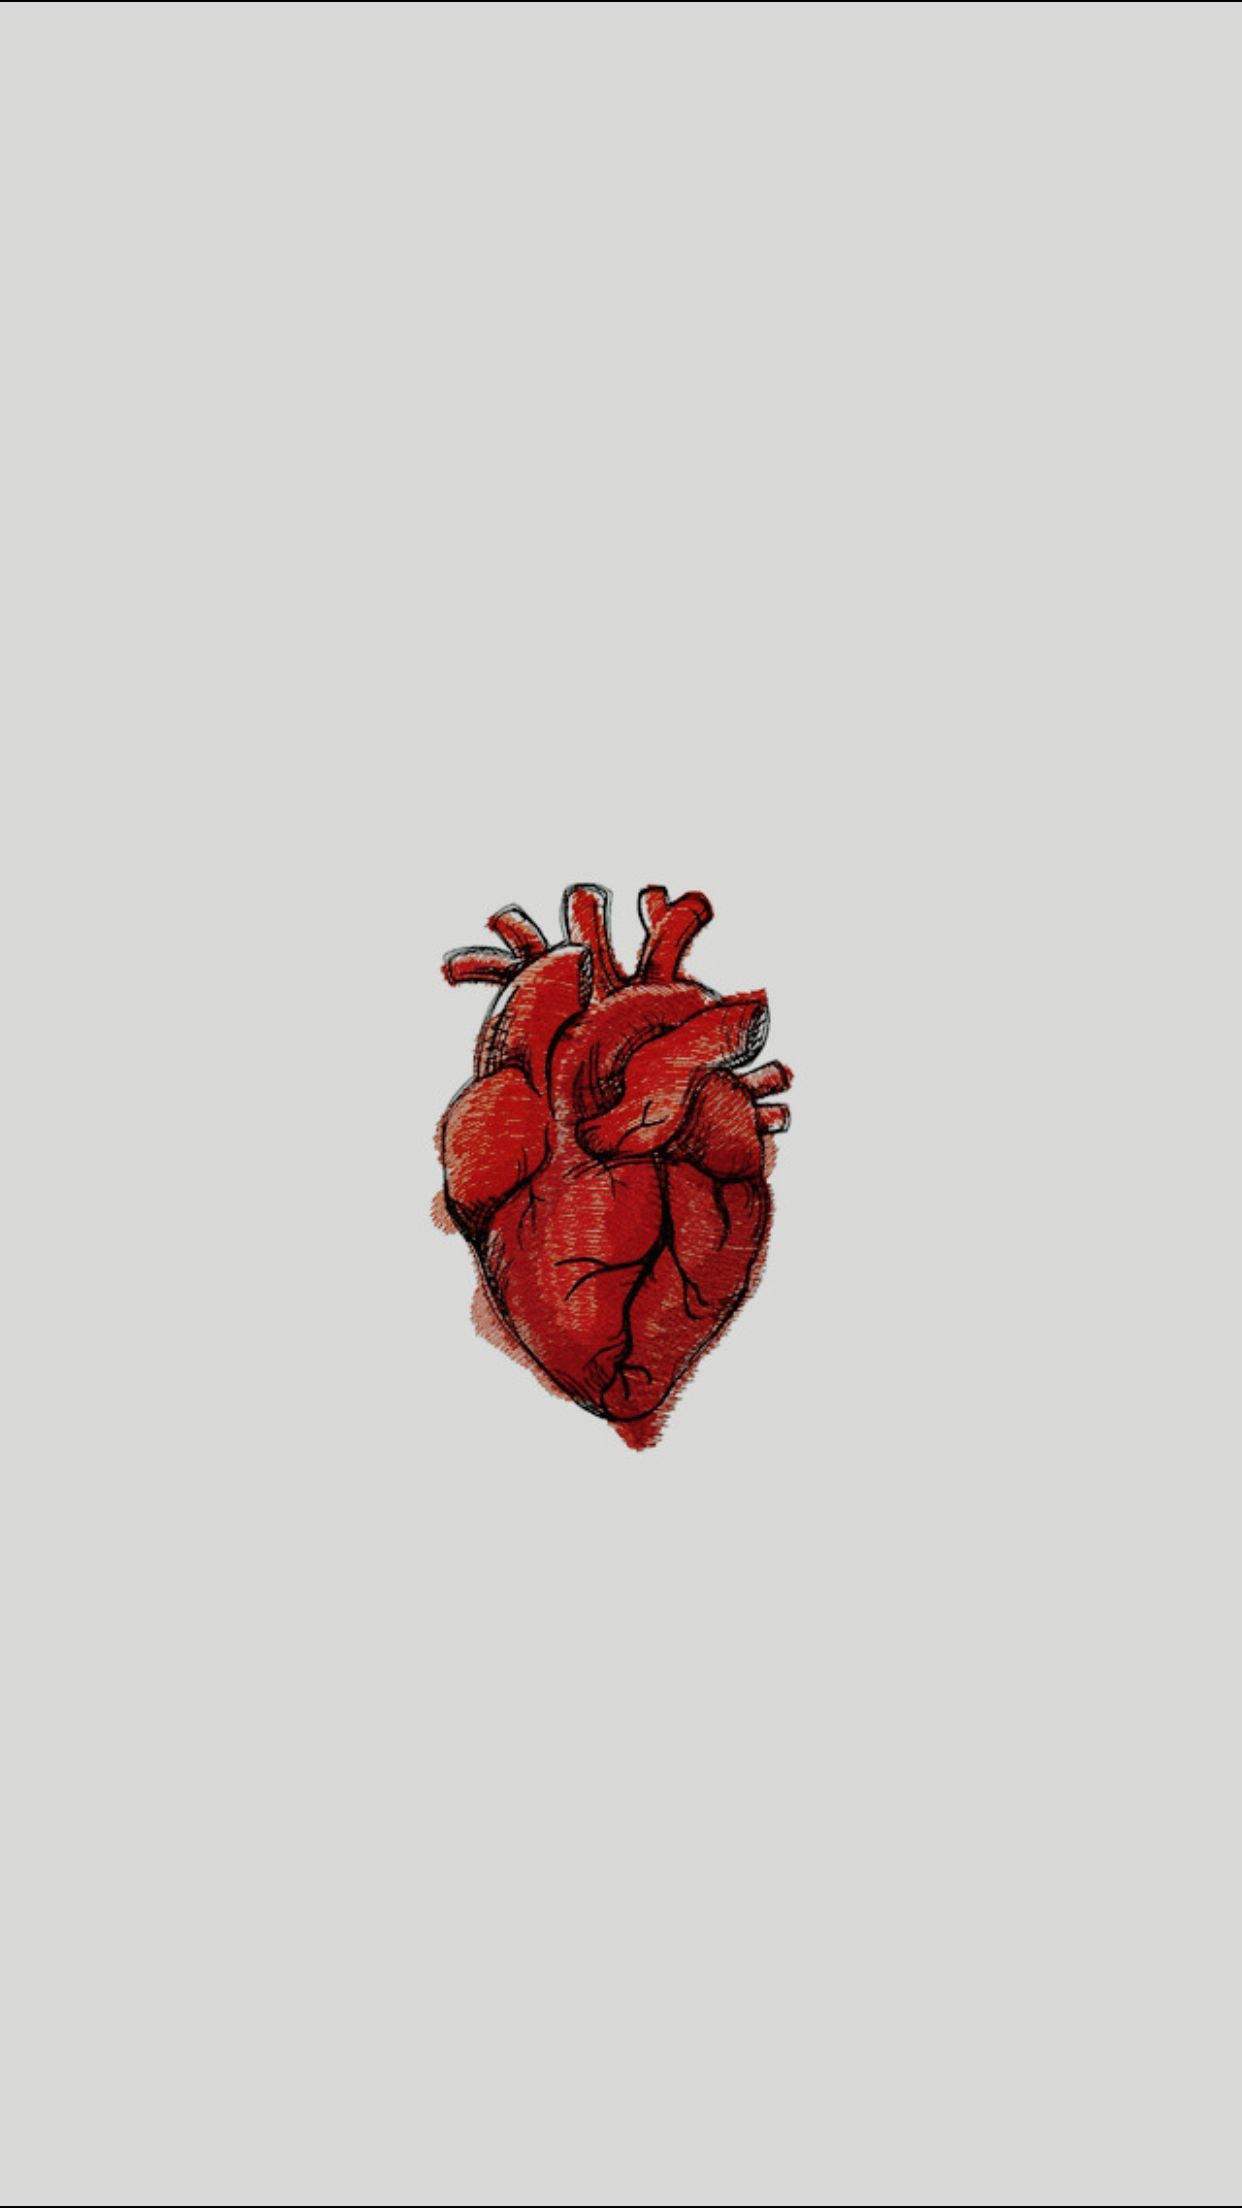 Real Heart Wallpaper Free Real Heart Background